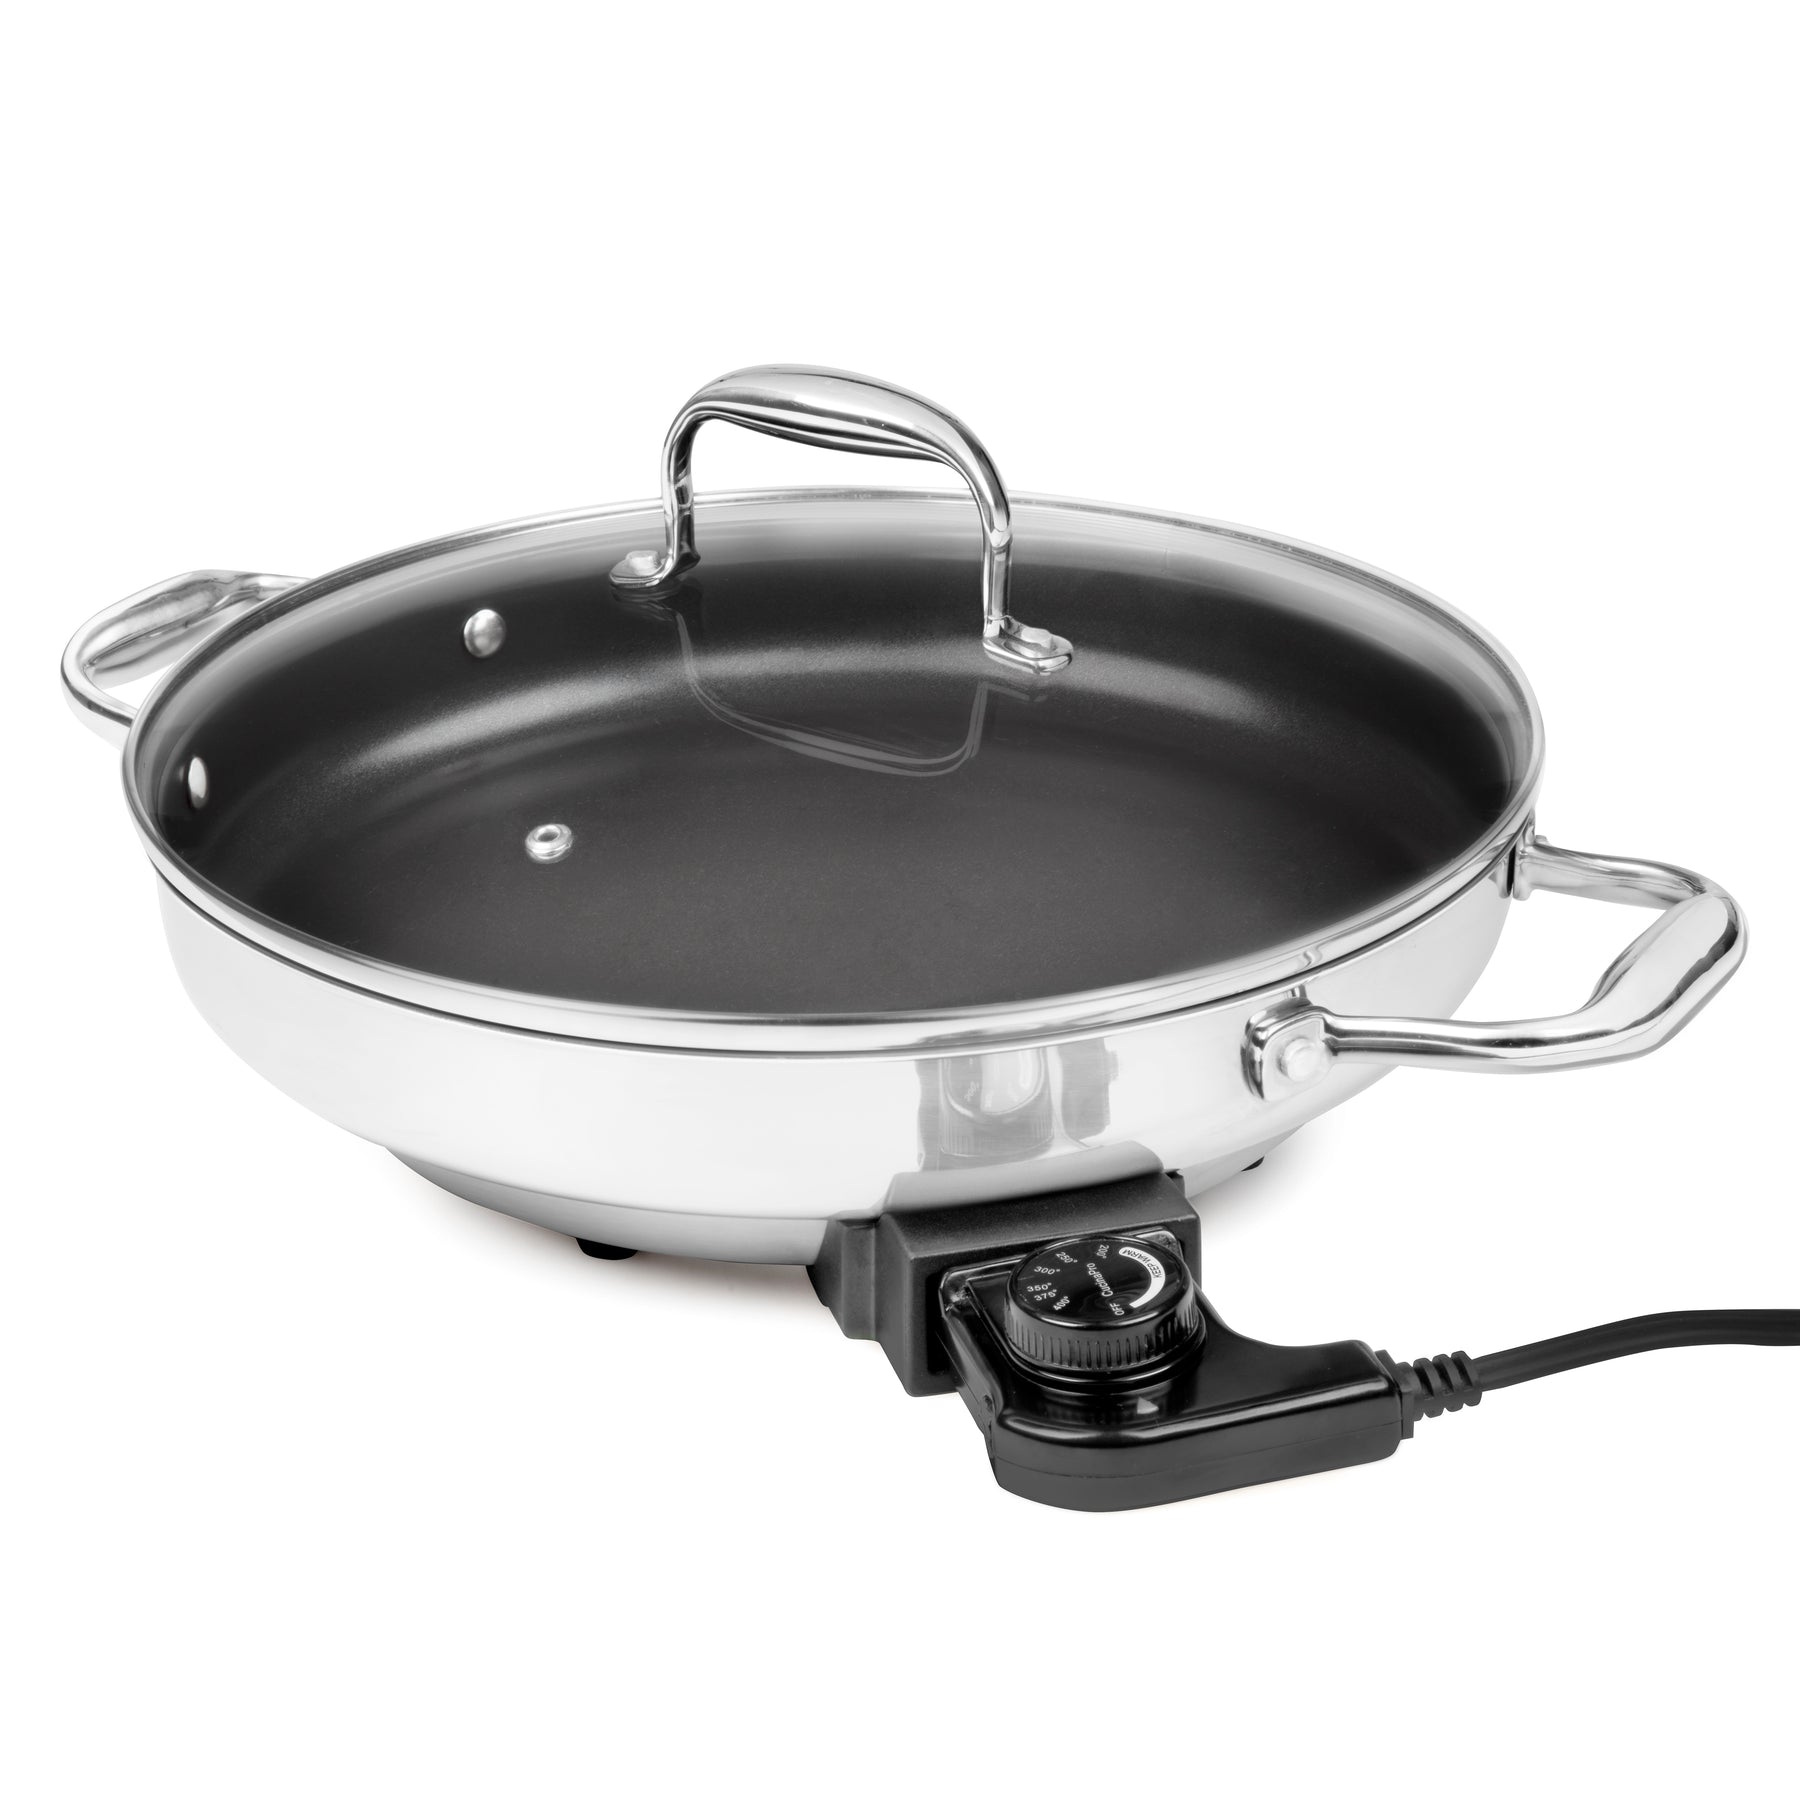 Stainless Steel Electric Skillet - Centex Cooks